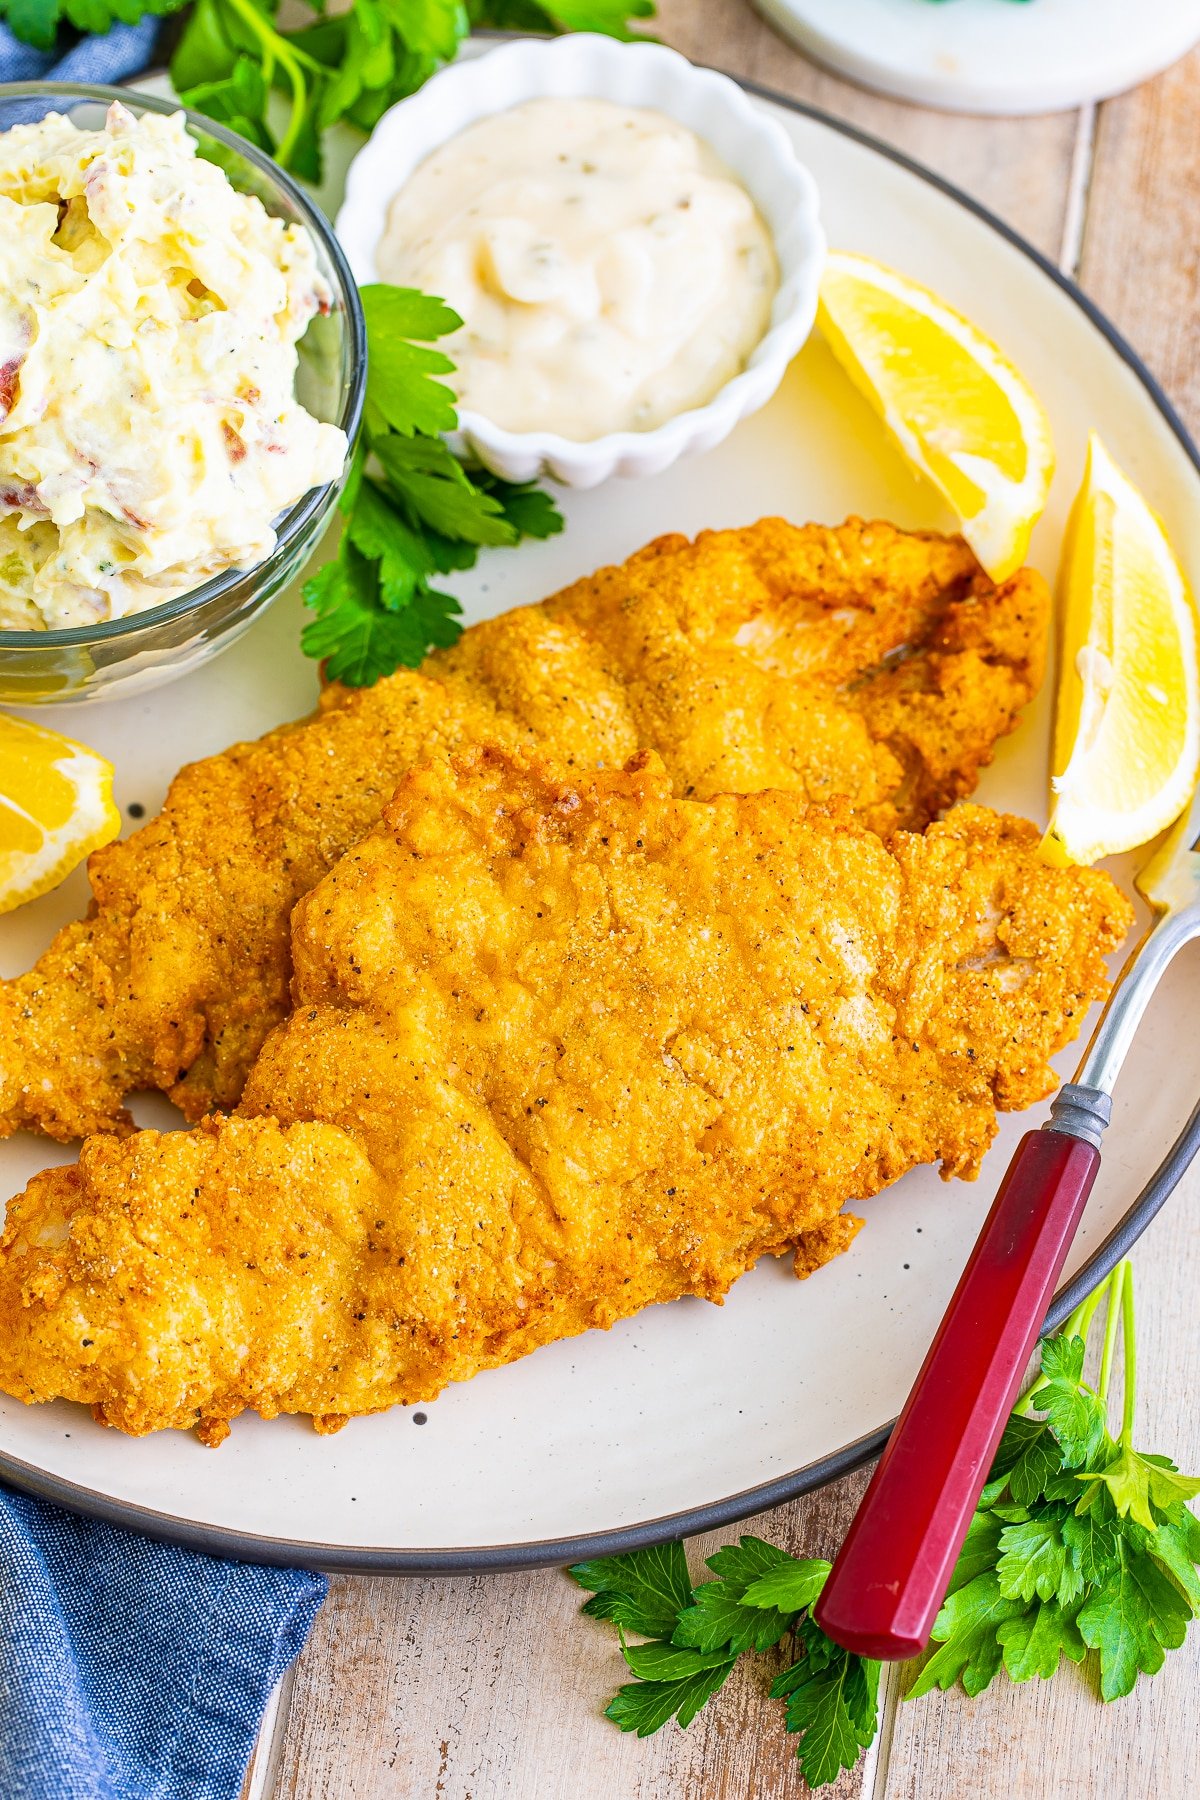 fried catfish recipe on a tan plate with sides